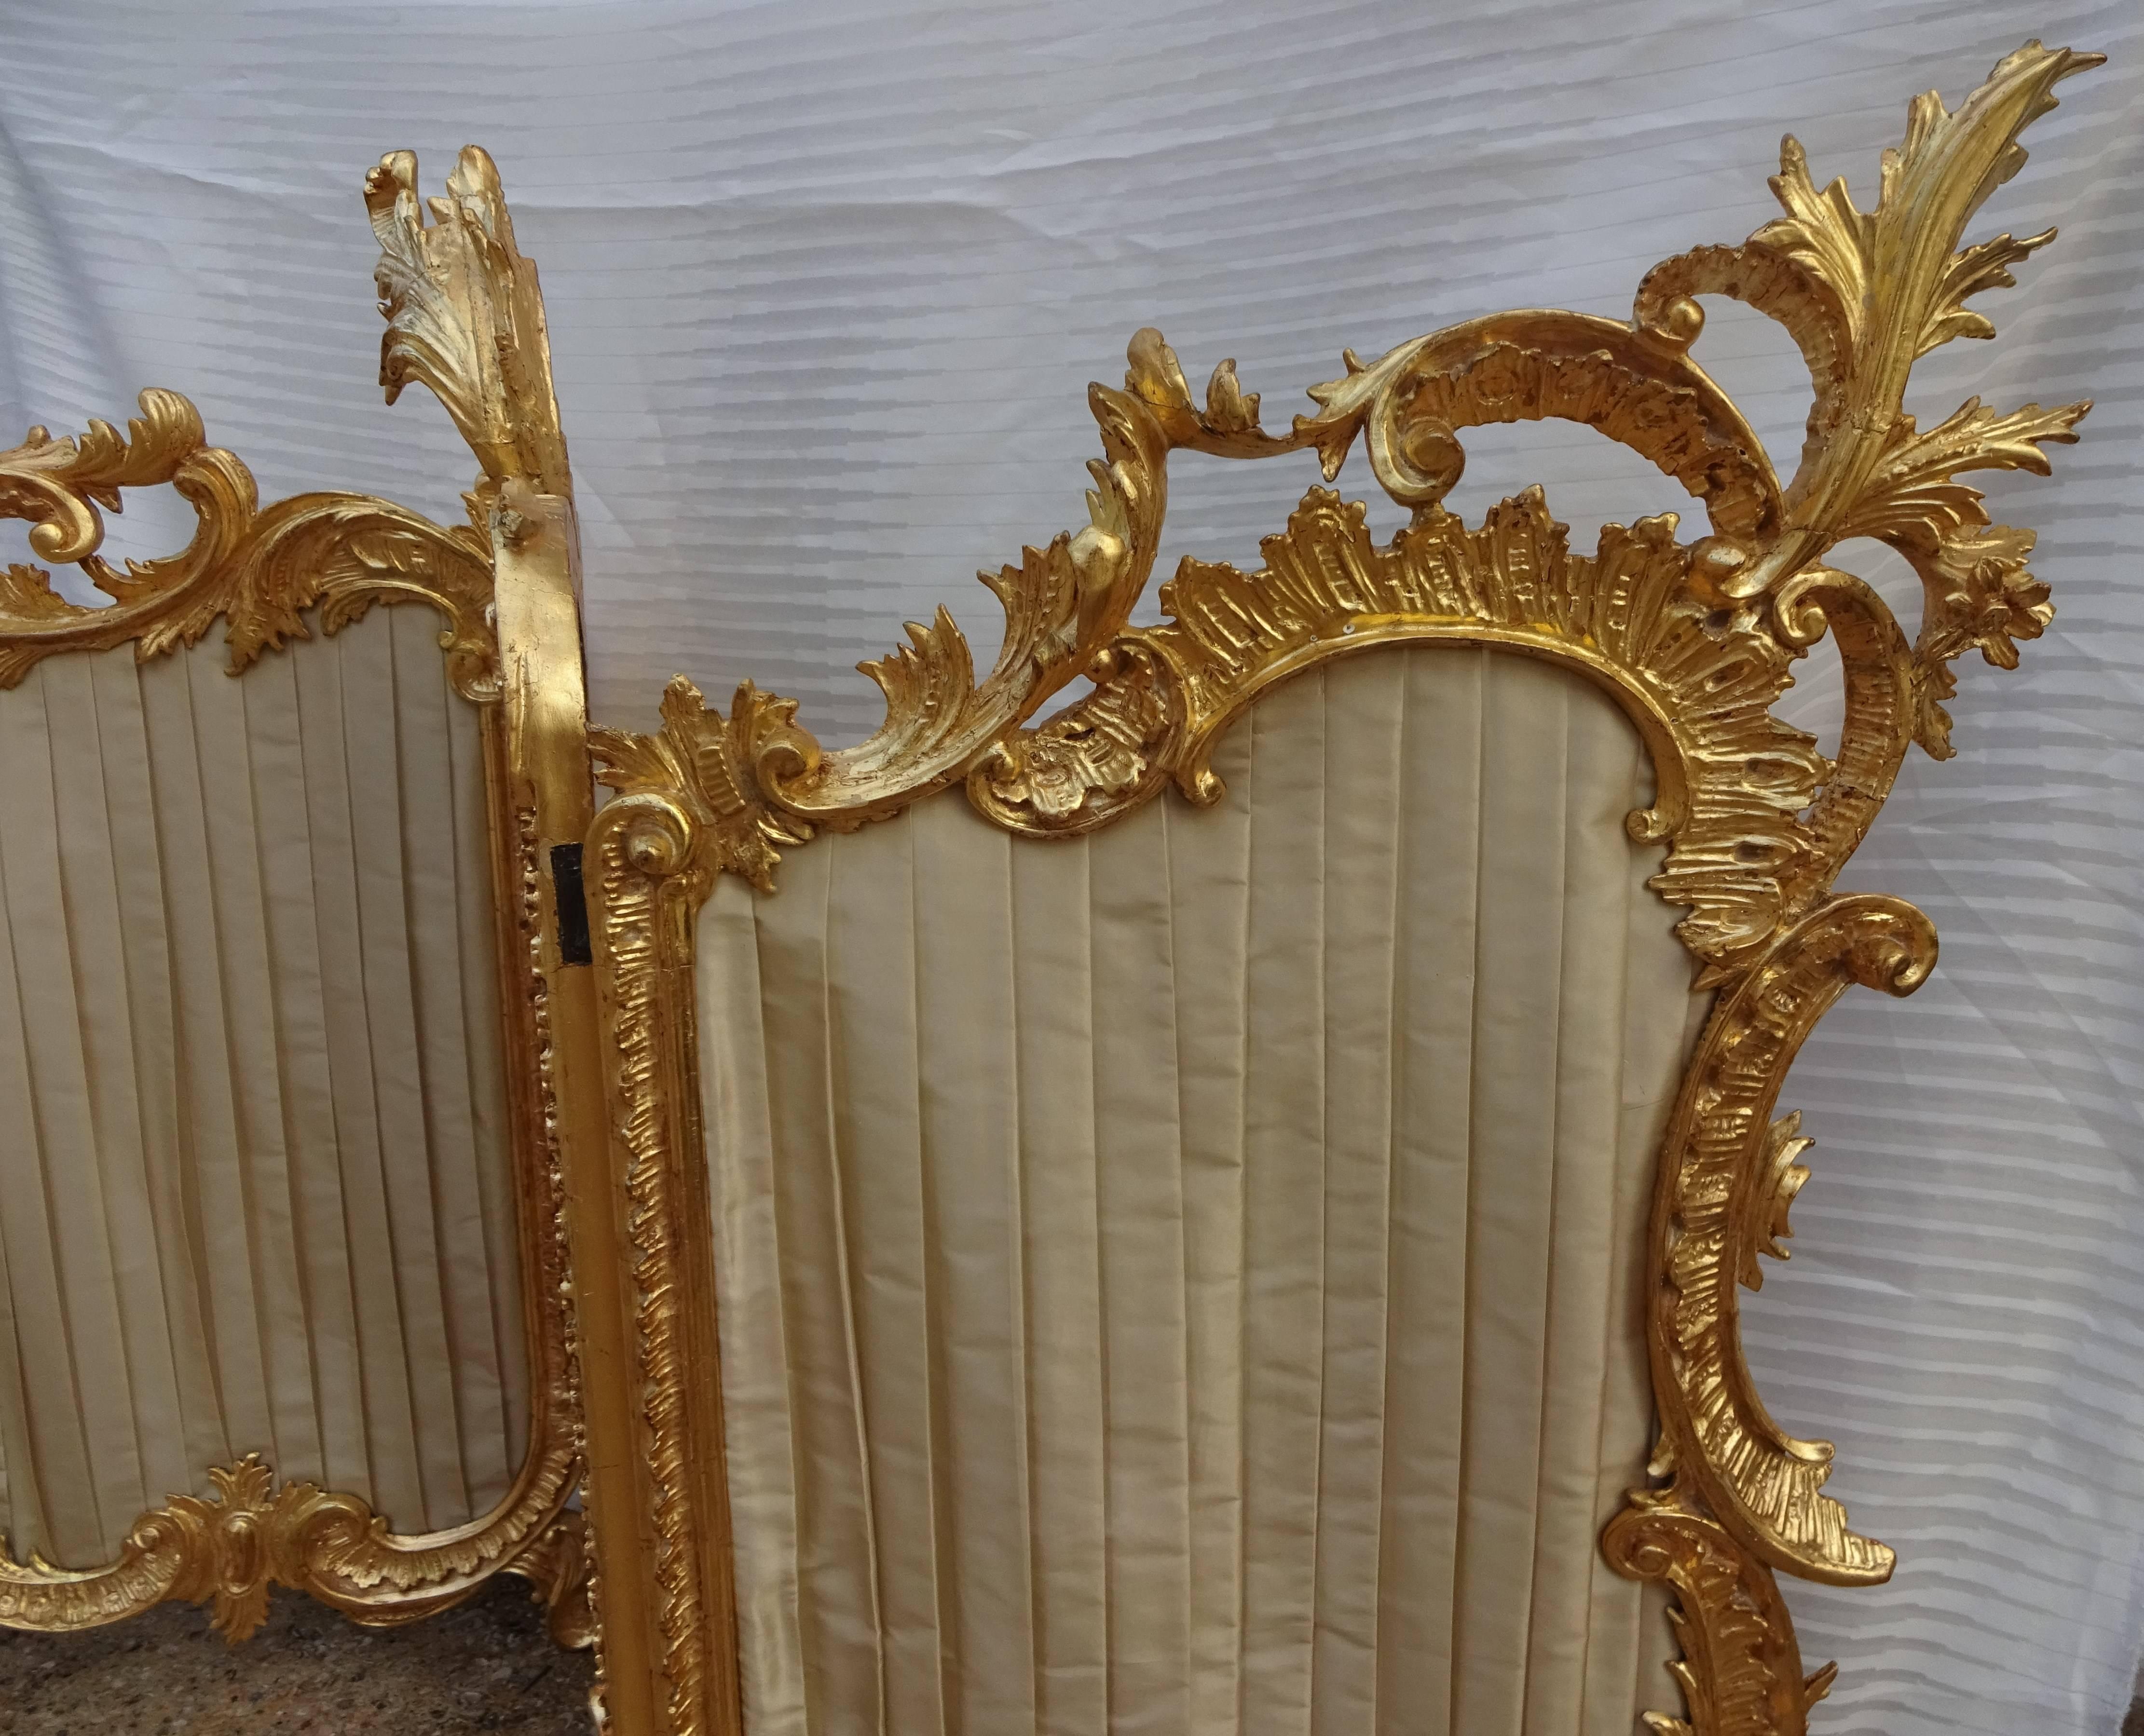 Rare fire screen, Louis XV, Rocaille period.
Three panels, with pleated silk upholstered front and back,
18th century, gilt carved wood.
Front and back gilt.
Great excellent condition, with minor wears consistent with age.
         